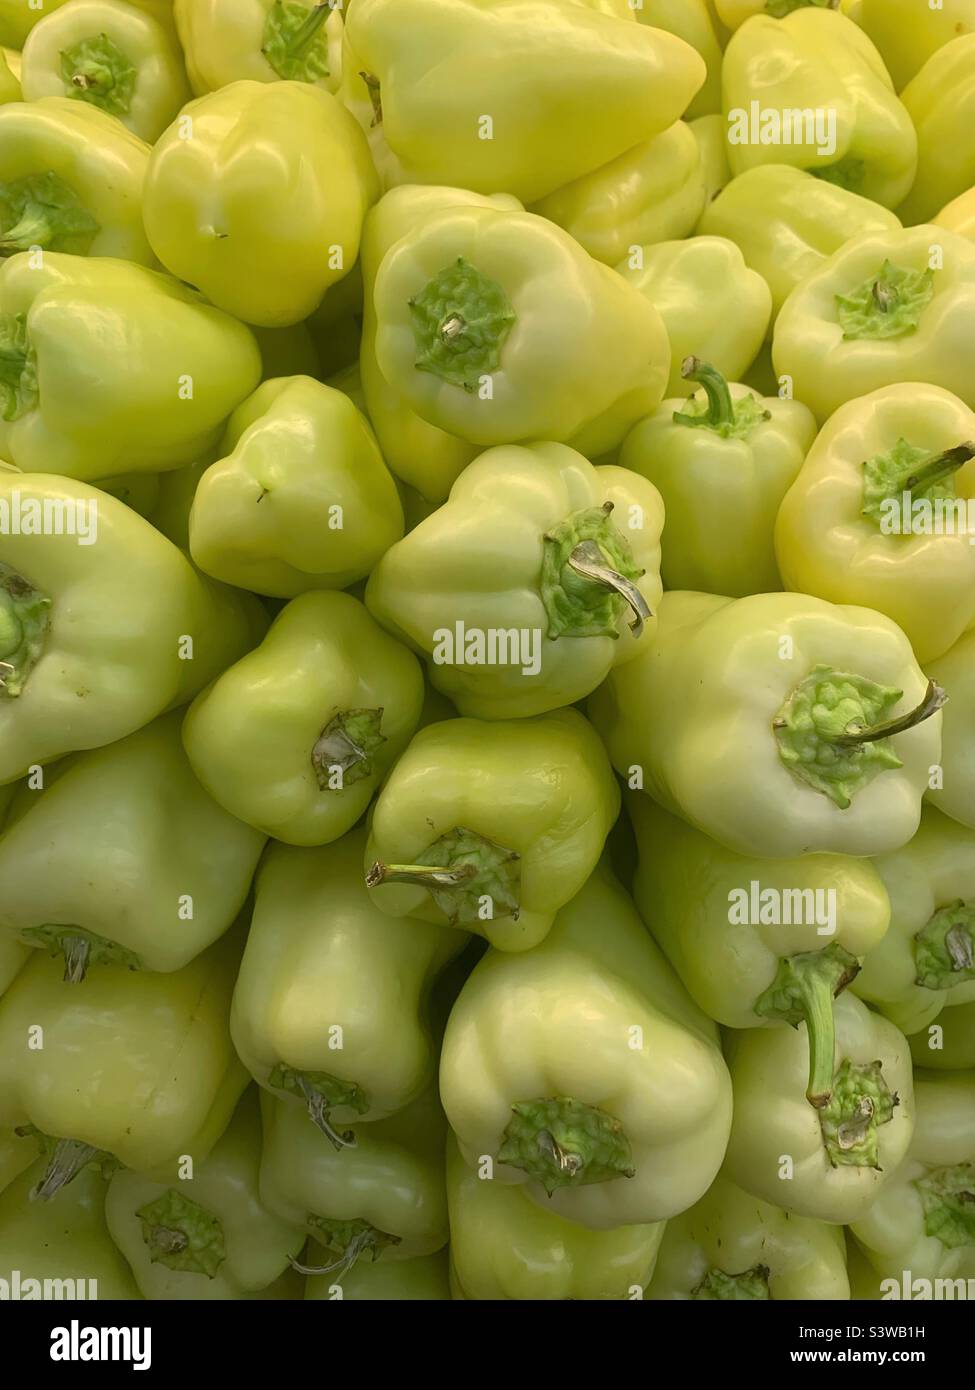 Bright yellow green Gypsy peppers in season. Stock Photo